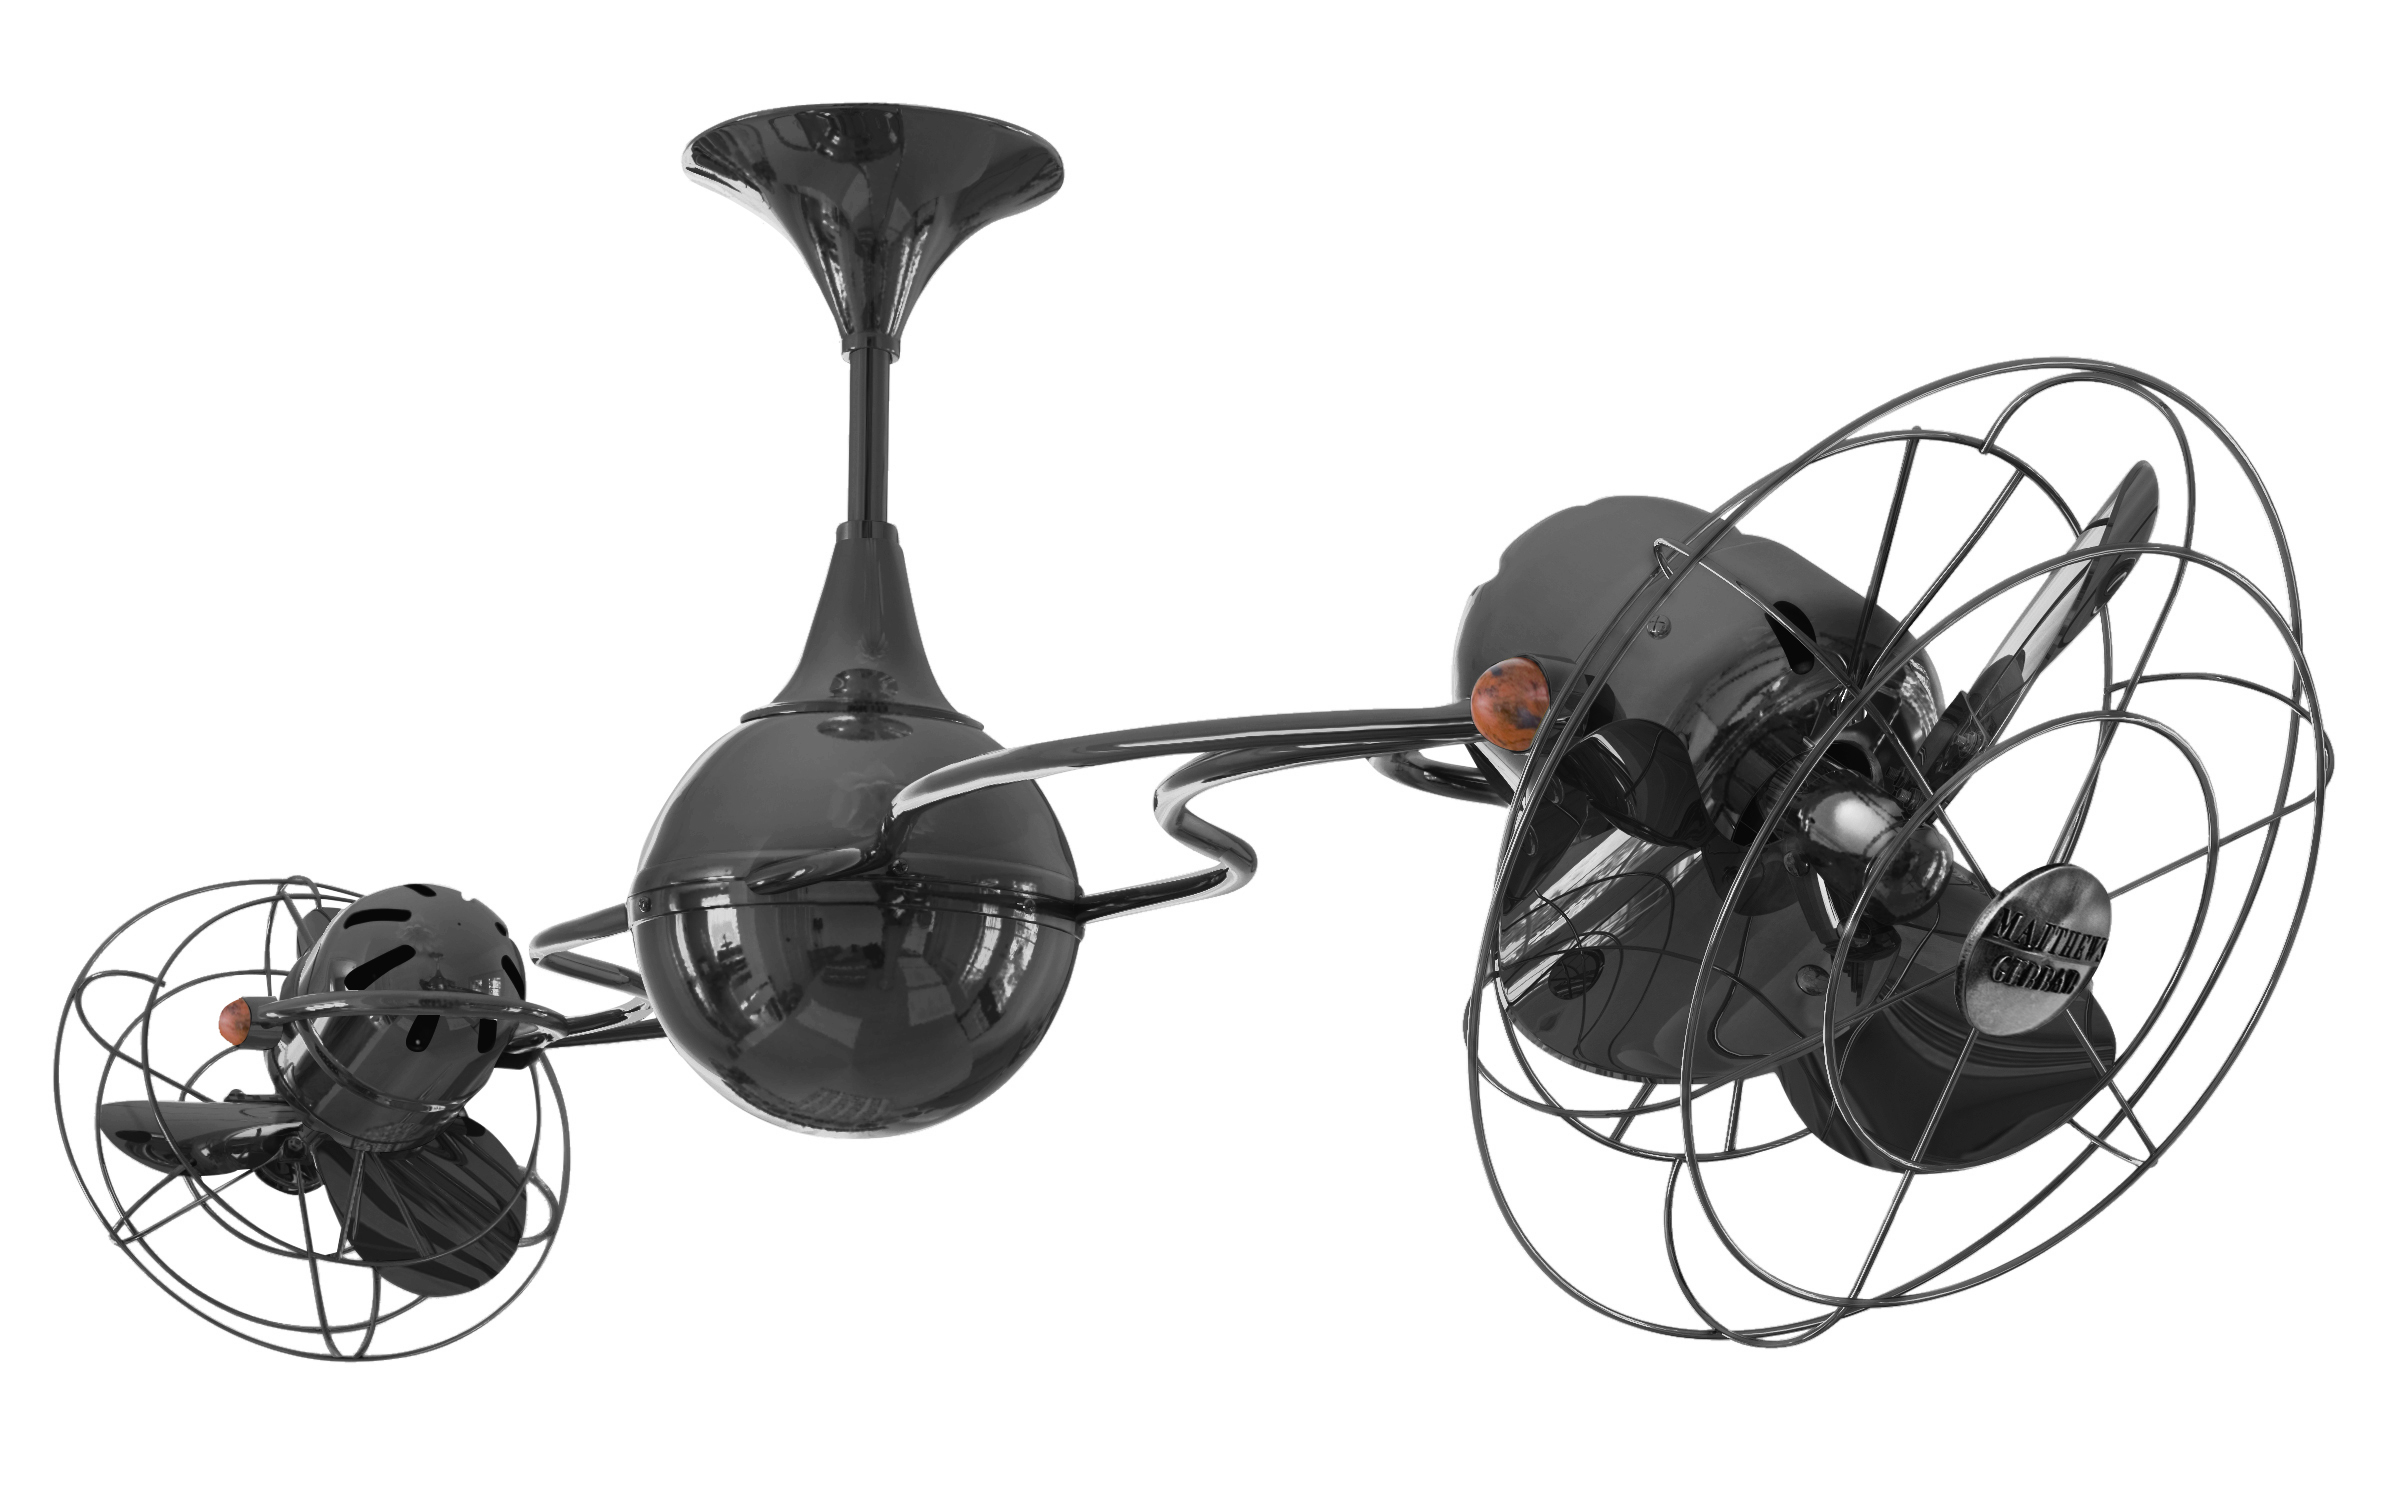 Italo Ventania rotational dual head ceiling fan in Black Nickel finish with Metal blades and decorative cage made by Matthews Fan Company.